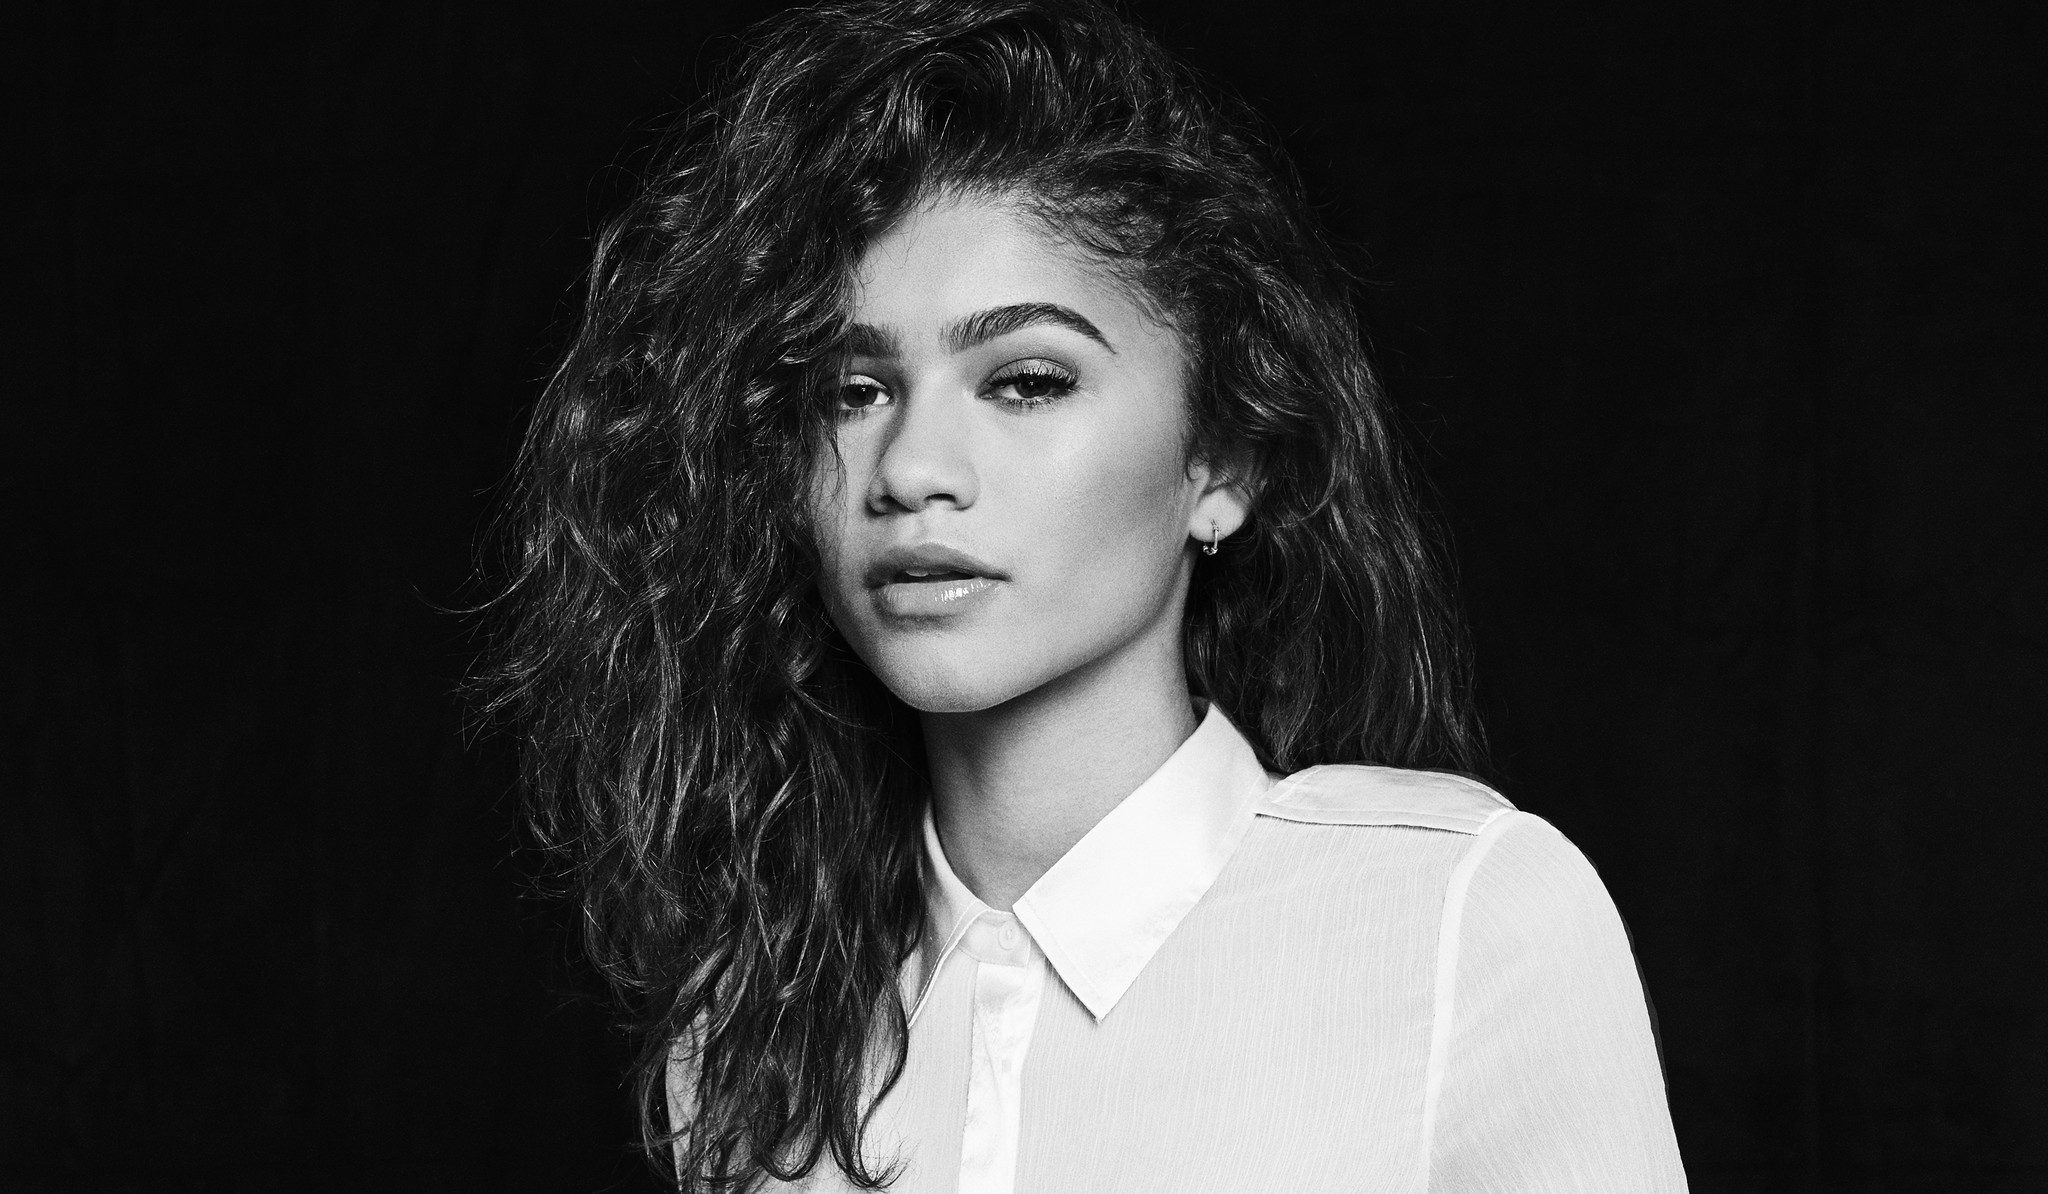 redeye-from-disney-starlet-to-activist-zendaya-won-t-fit-in-your-boxes-20161230